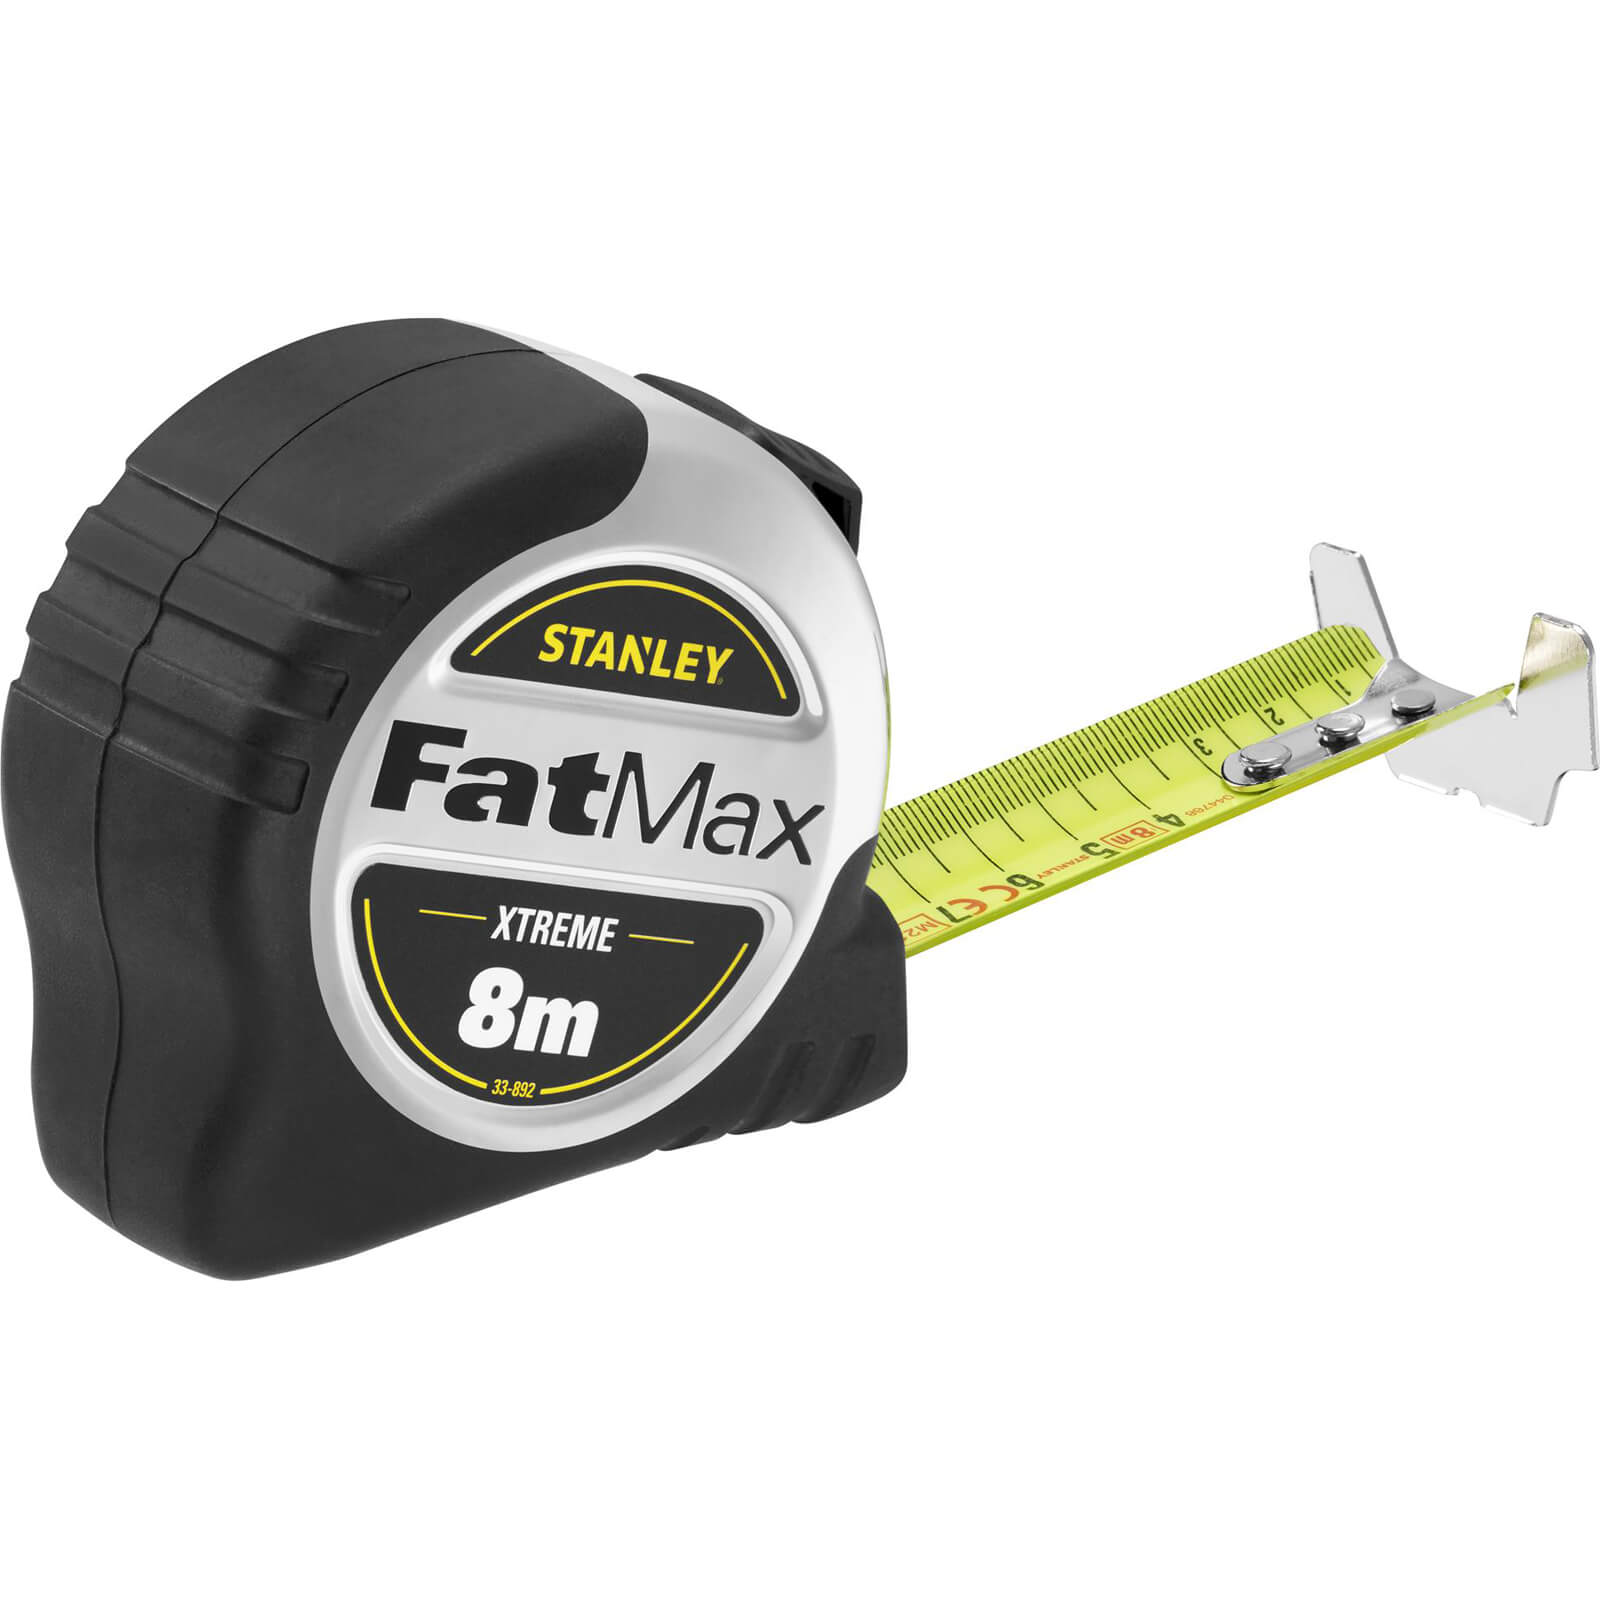 Image of Stanley FatMax XTREME Tape Measure Metric 8m 32mm